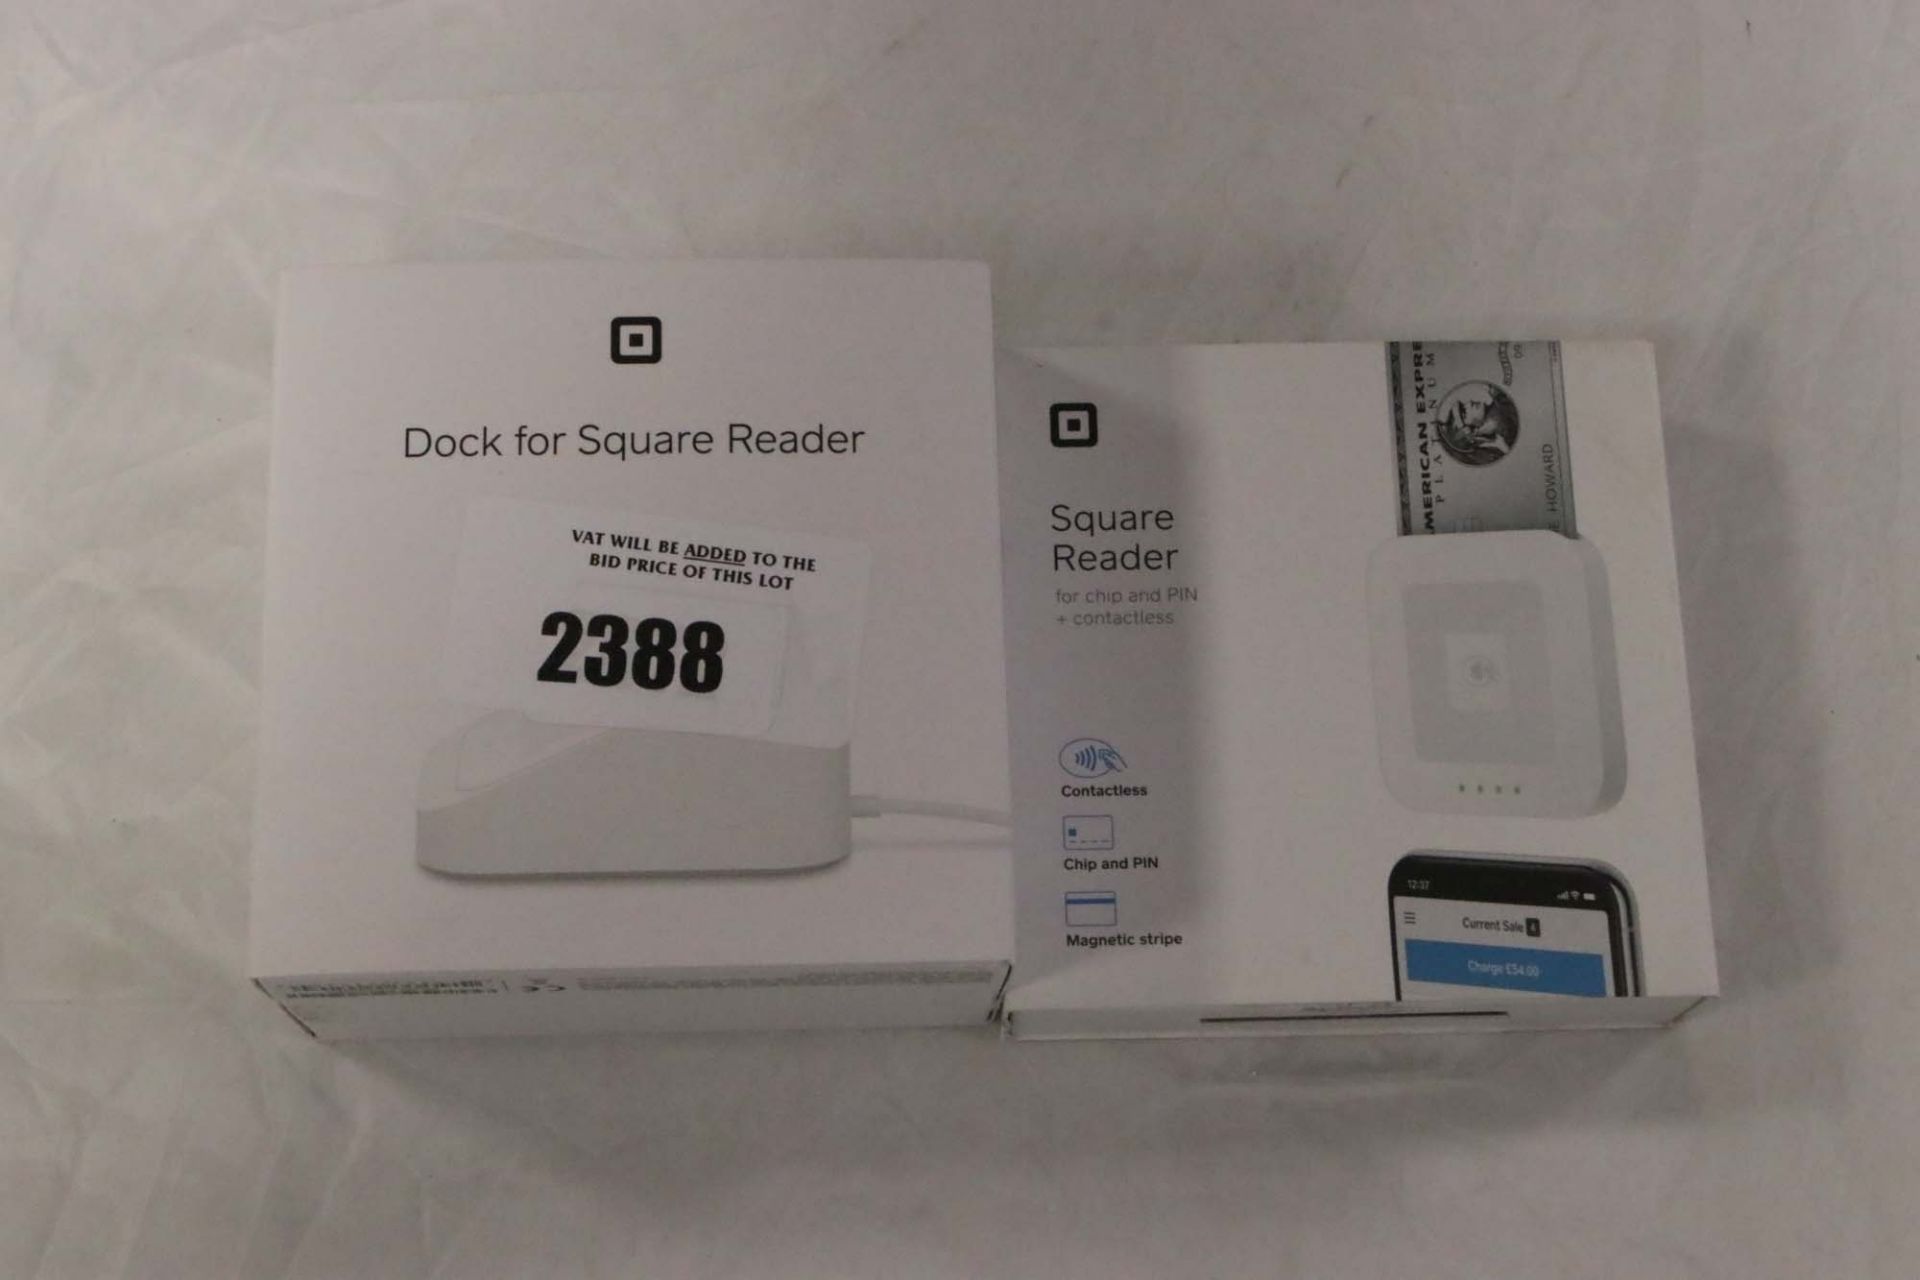 2072 - Dock 4 Square reader and a Square reader